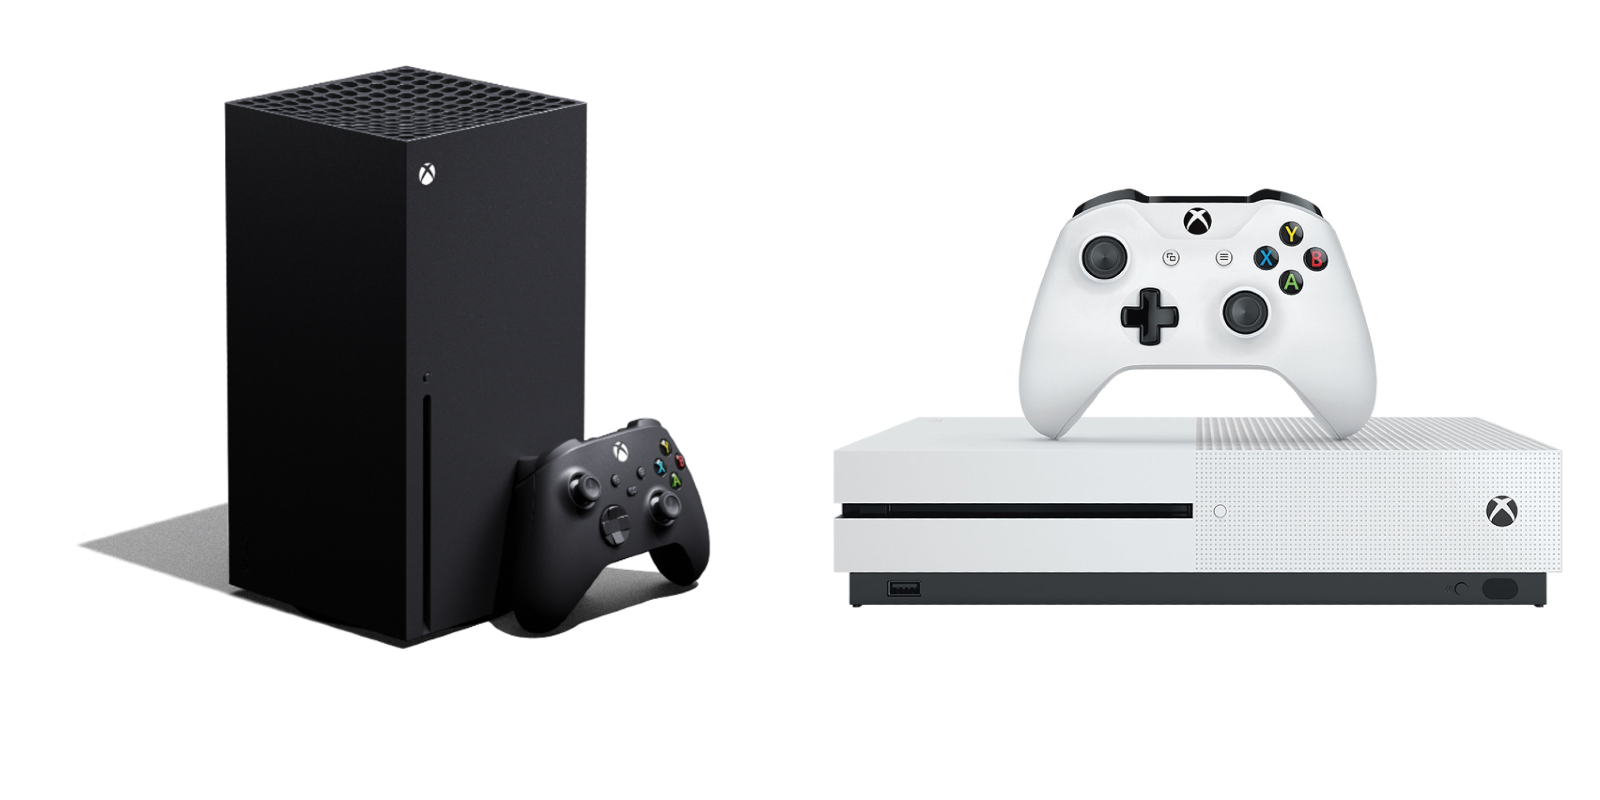 A split-screen image of an Xbox Series X and an Xbox One